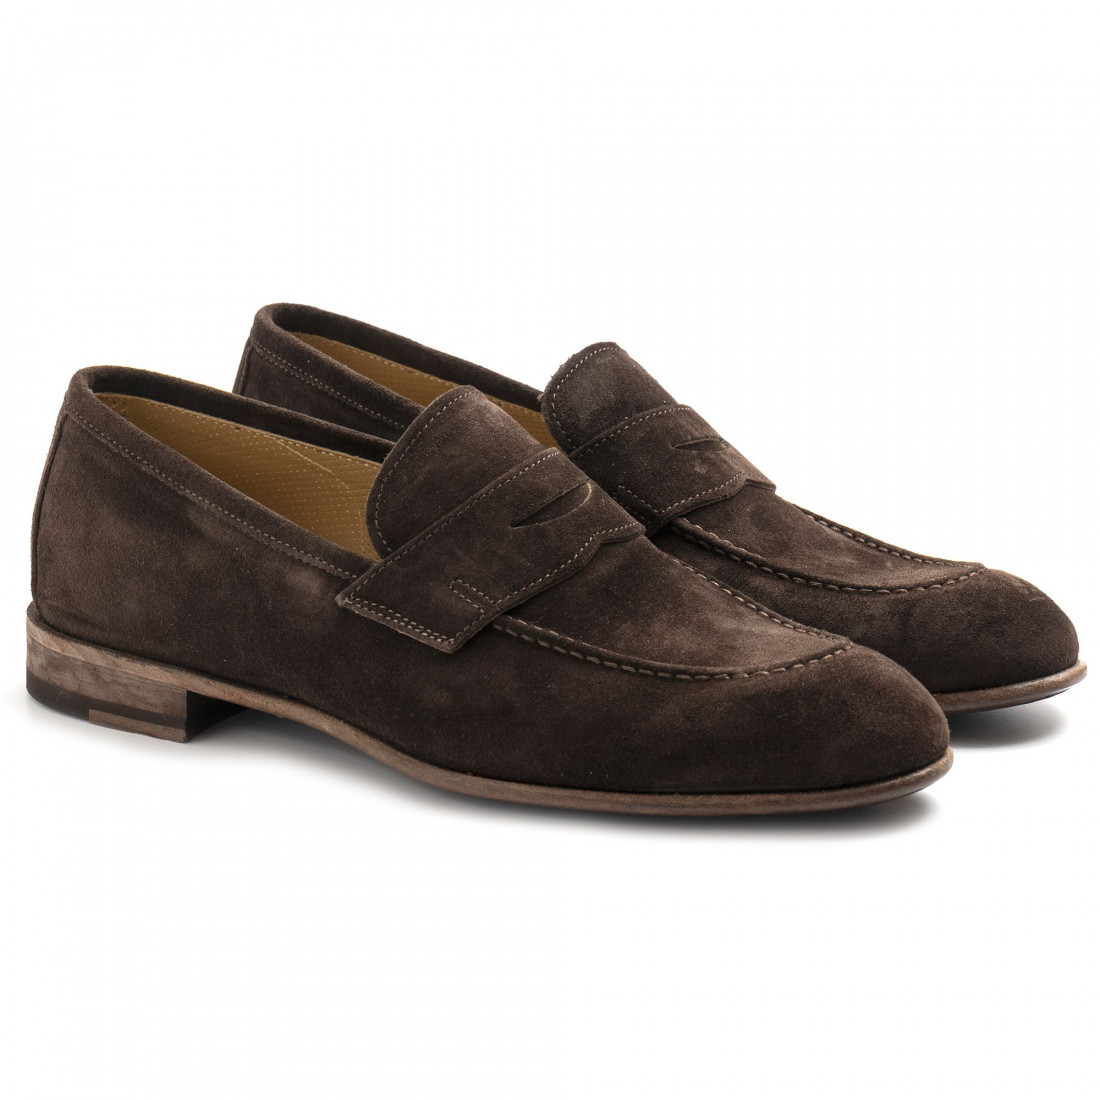 John White by Brecos men's moccasins in soft brown suede